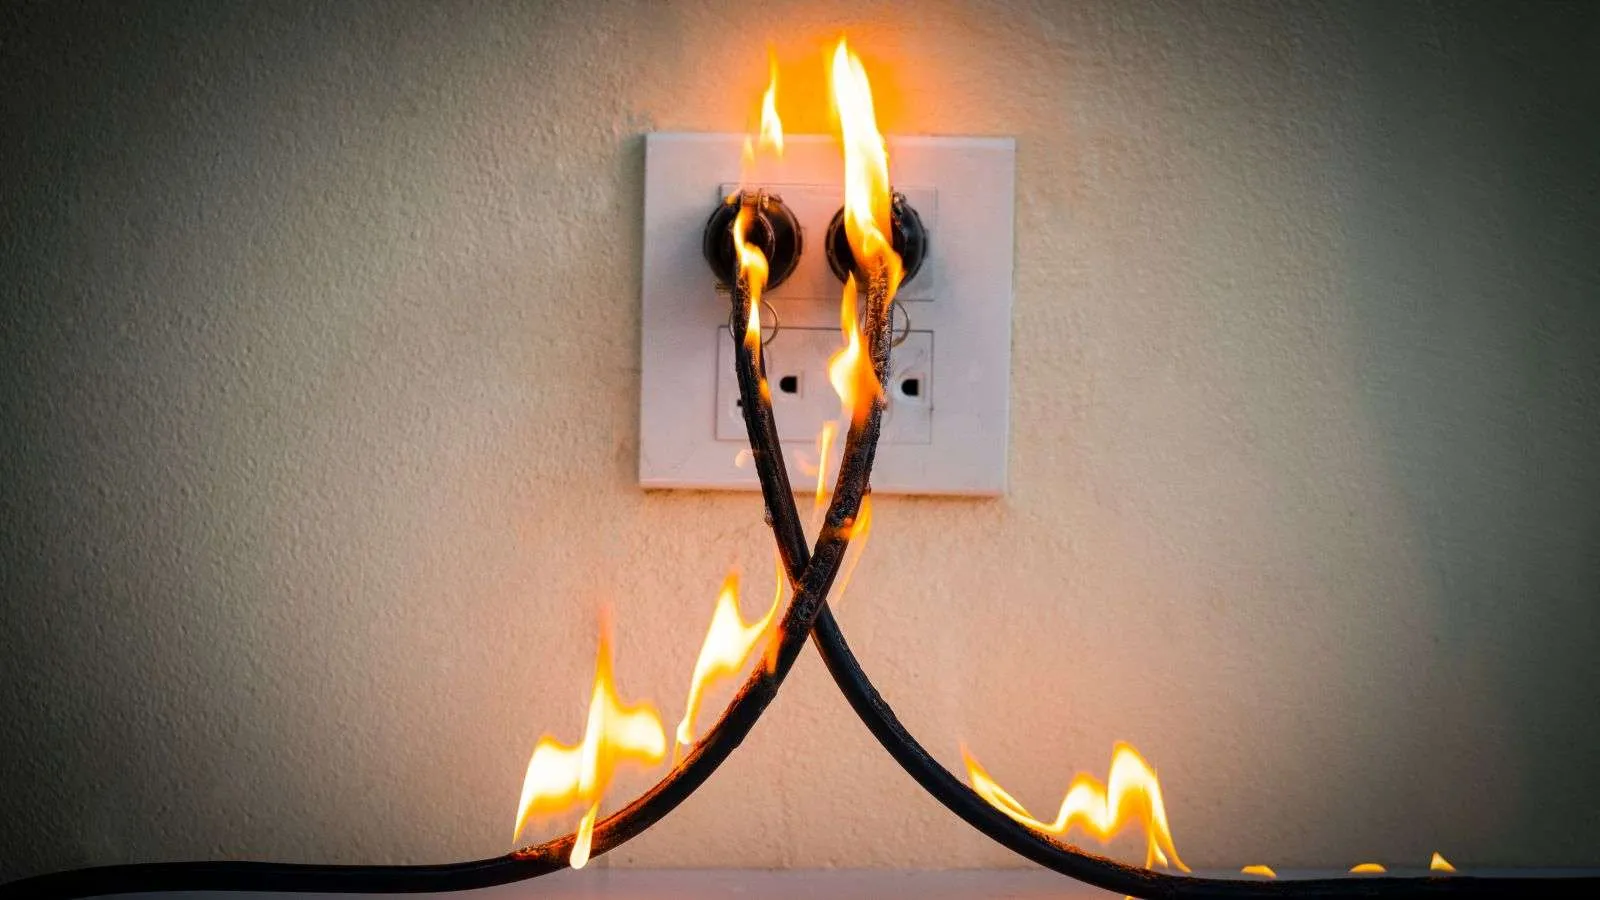 Electrical fire - bighomeprojects.com